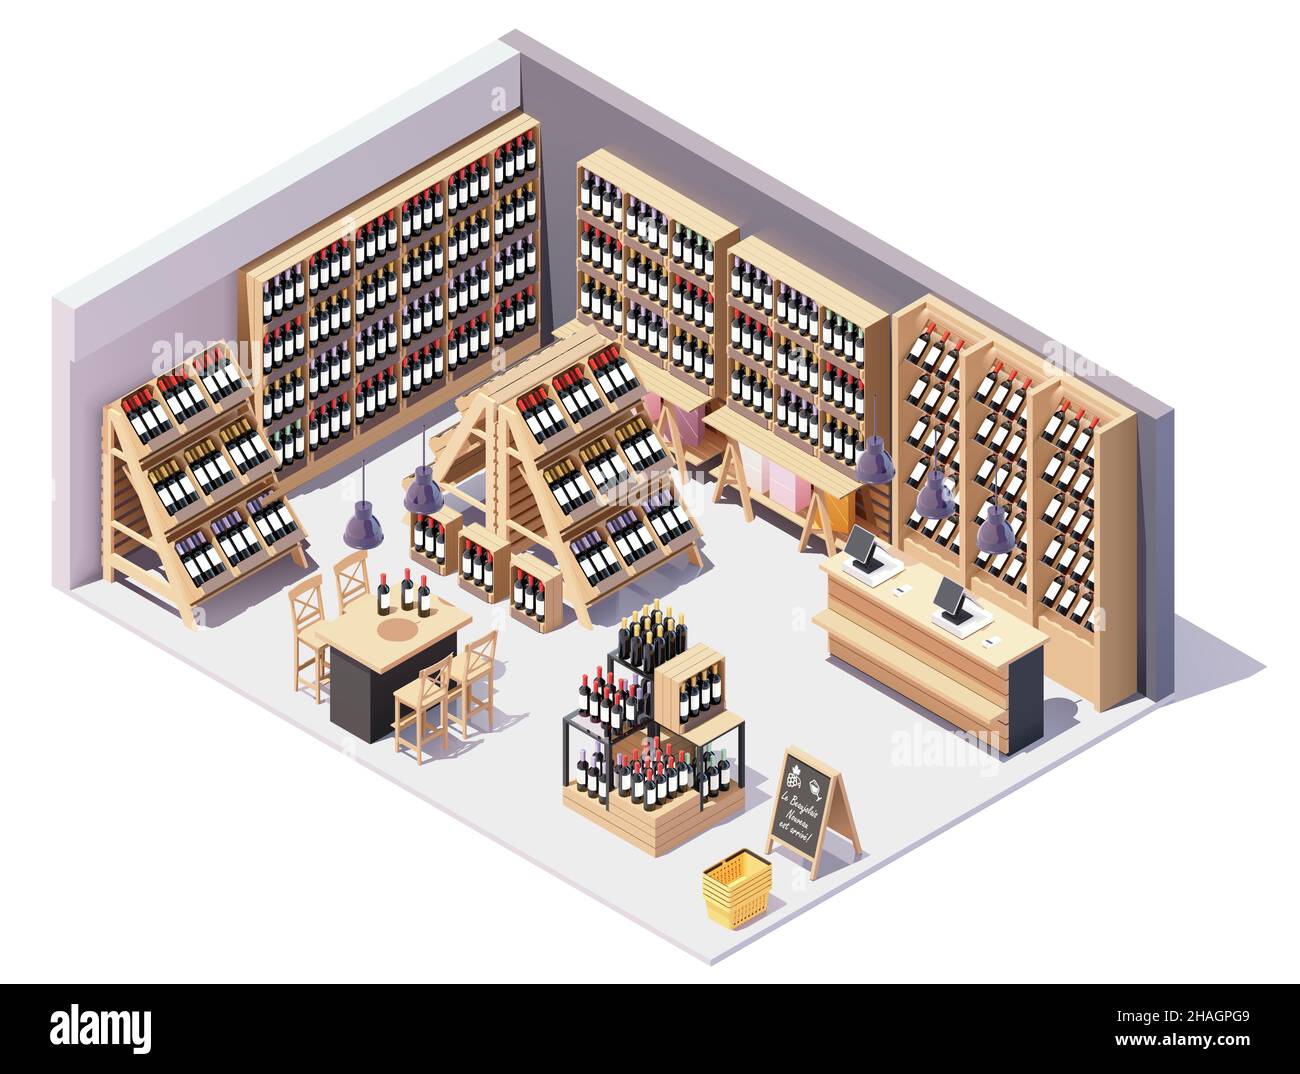 Vector isometric supermarket or grocery store wine department interior with furniture and equipment. Wine bottles on displays, shelves and gondolas Stock Vector